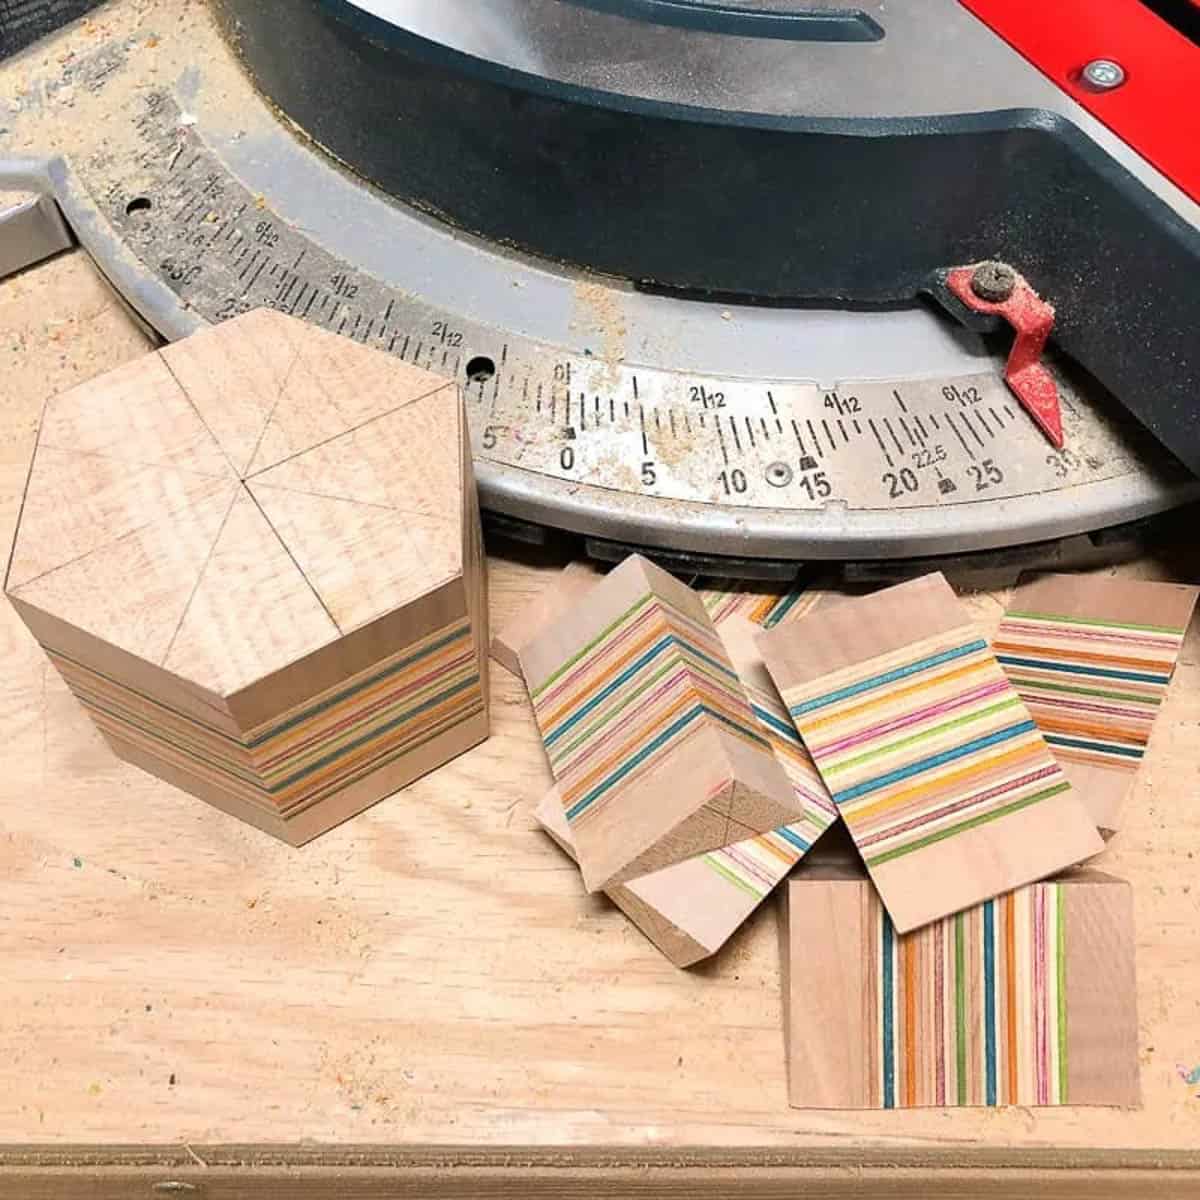 miter saw set to 30 degrees to cut hexagon shape for DIY candle holder